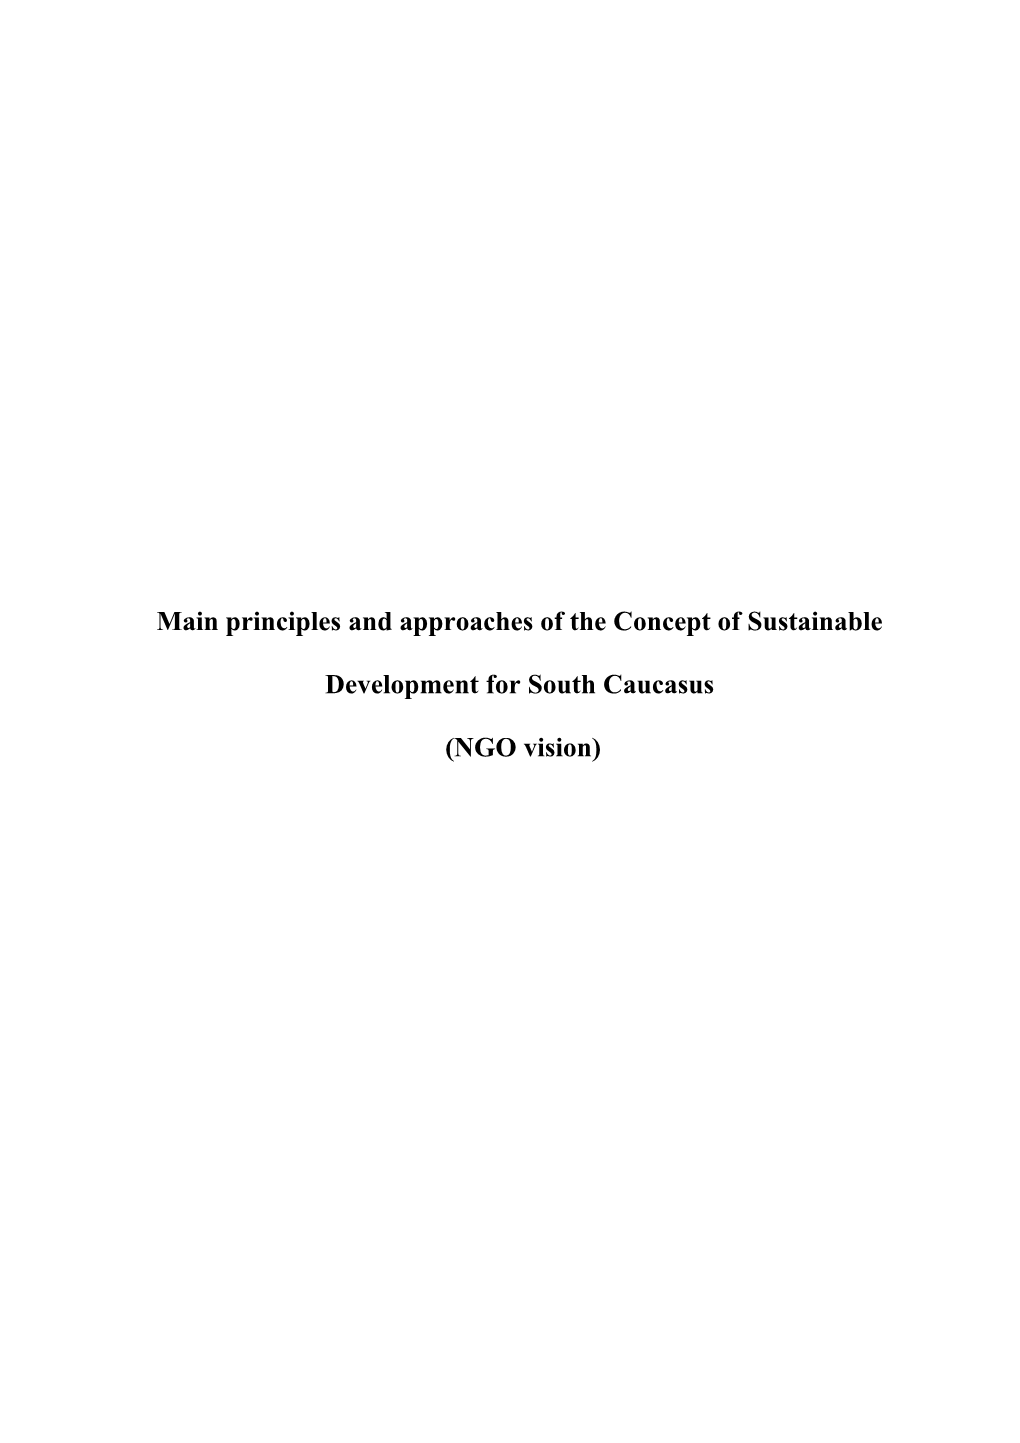 Main Principles and Approaches of the Concept of Sustainable